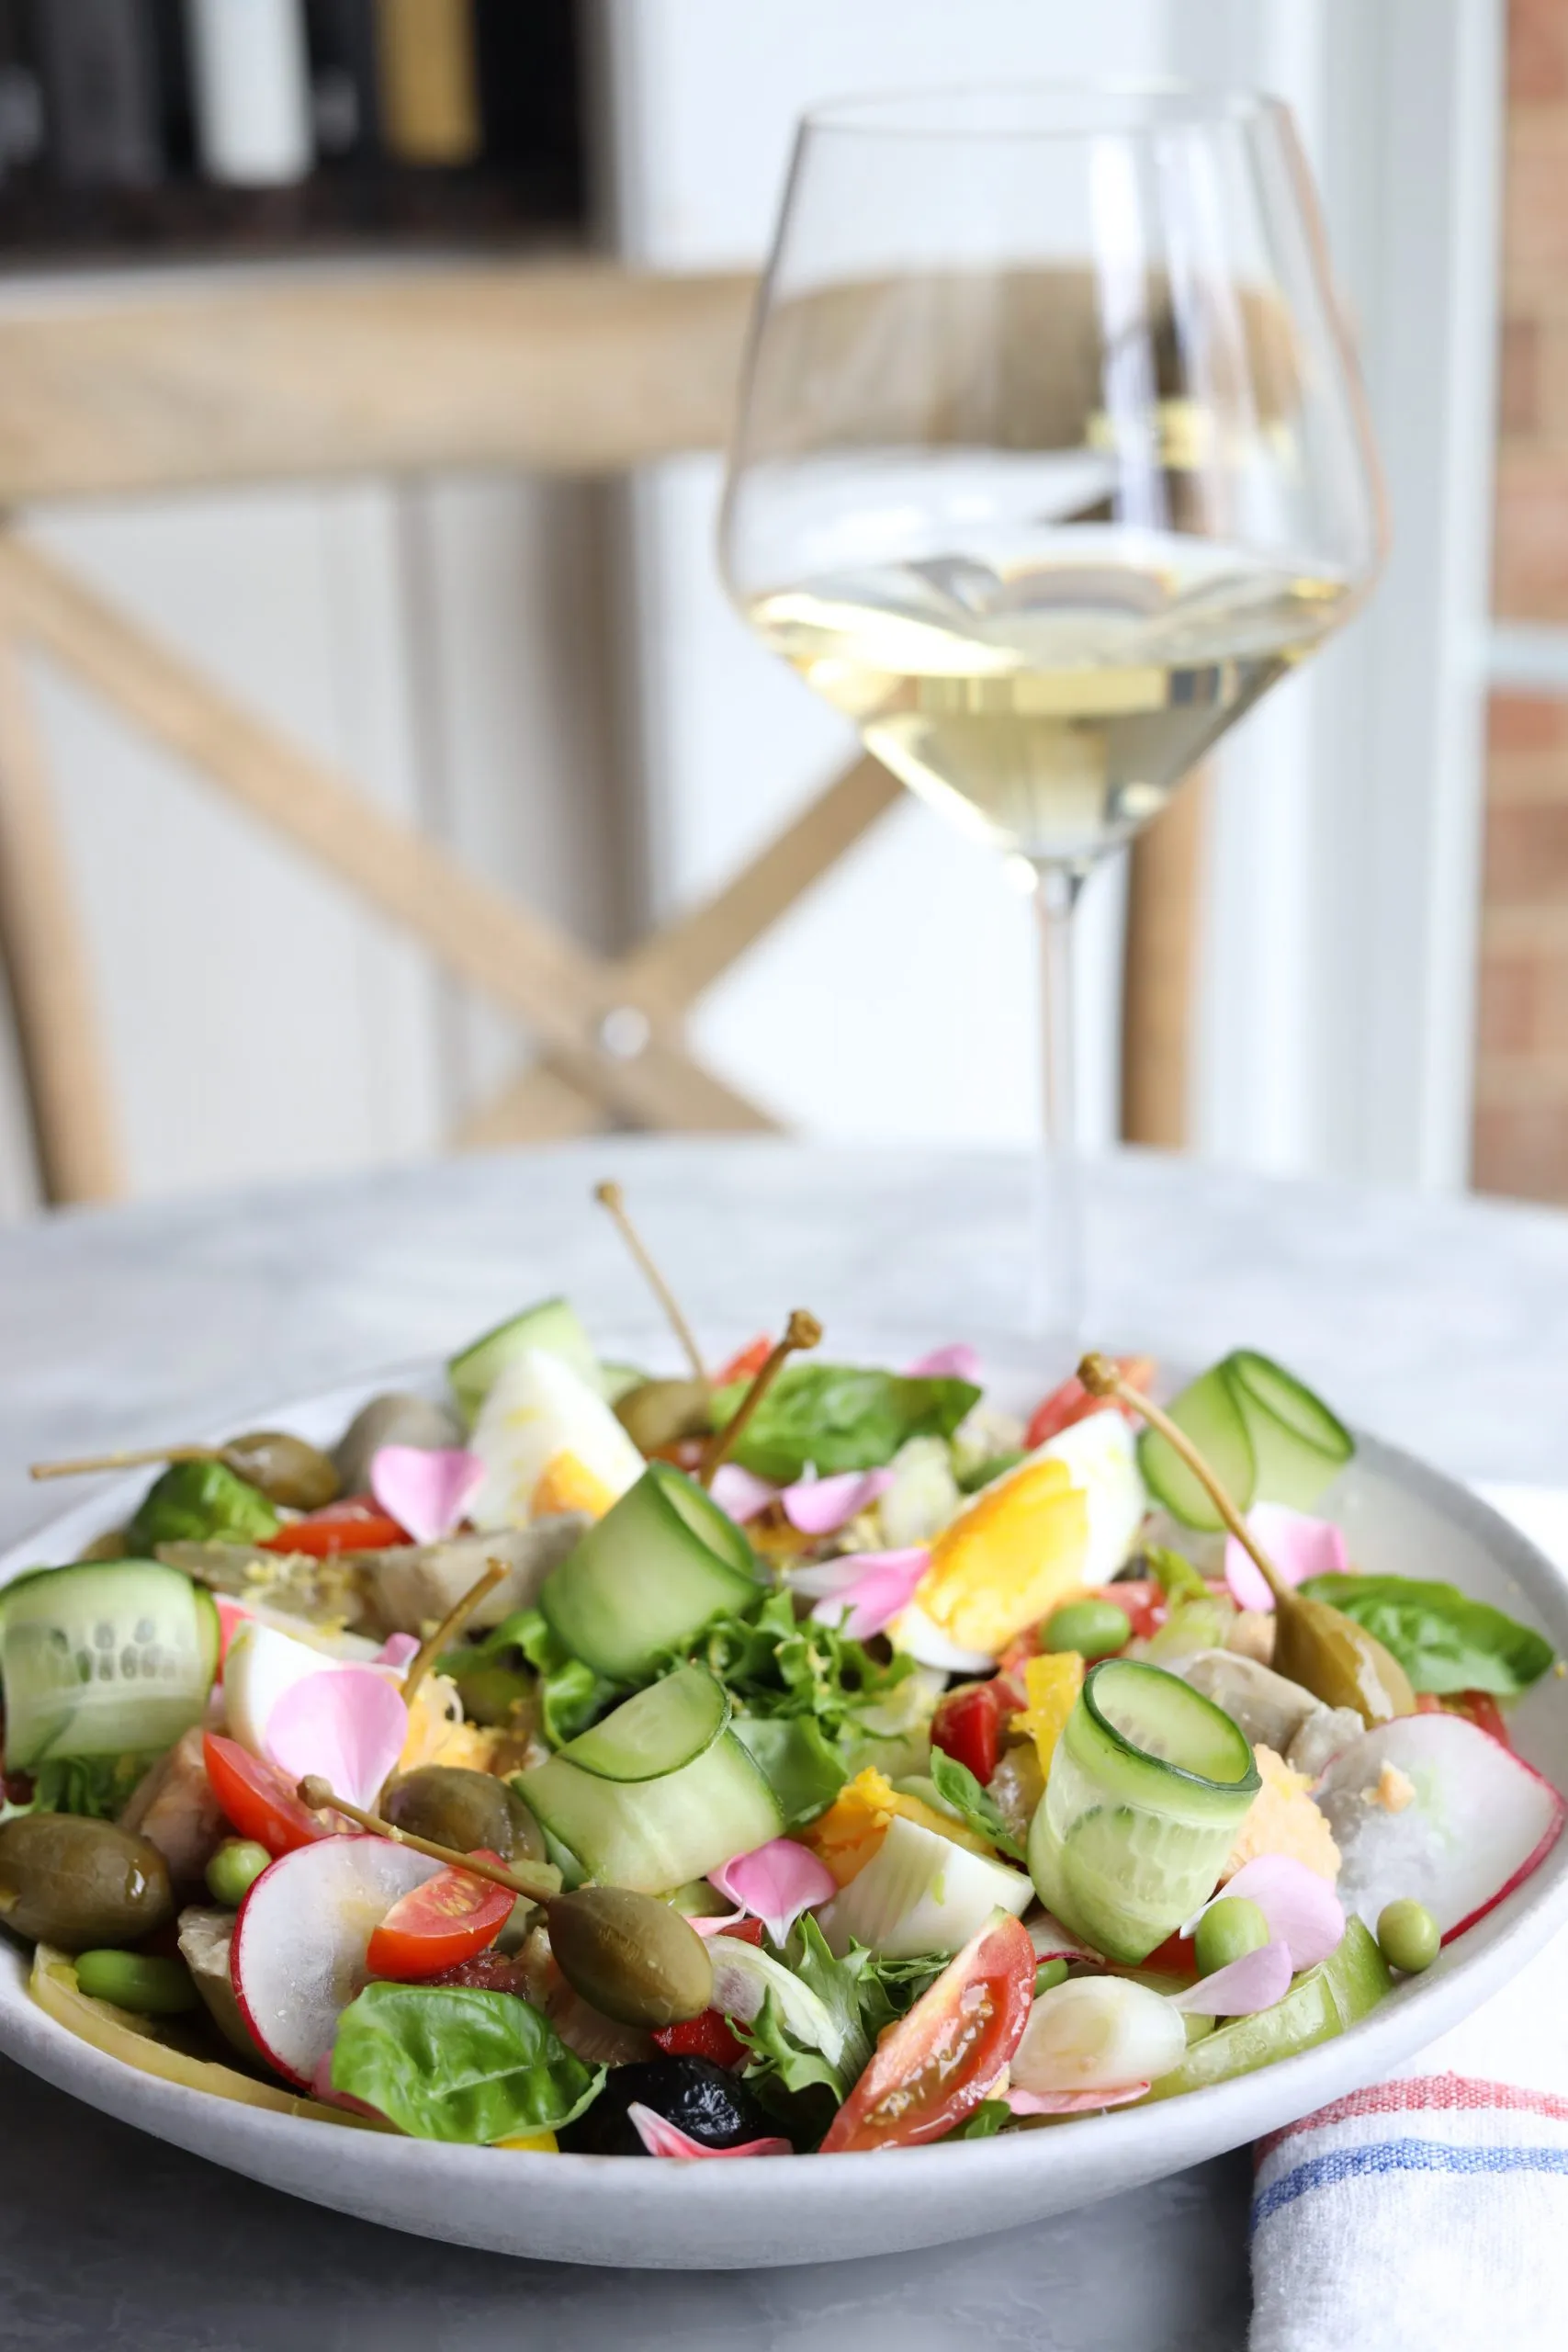 Nicoise salad - tomatoes, artichokes, capers, cucumbers olives and capers with tuna